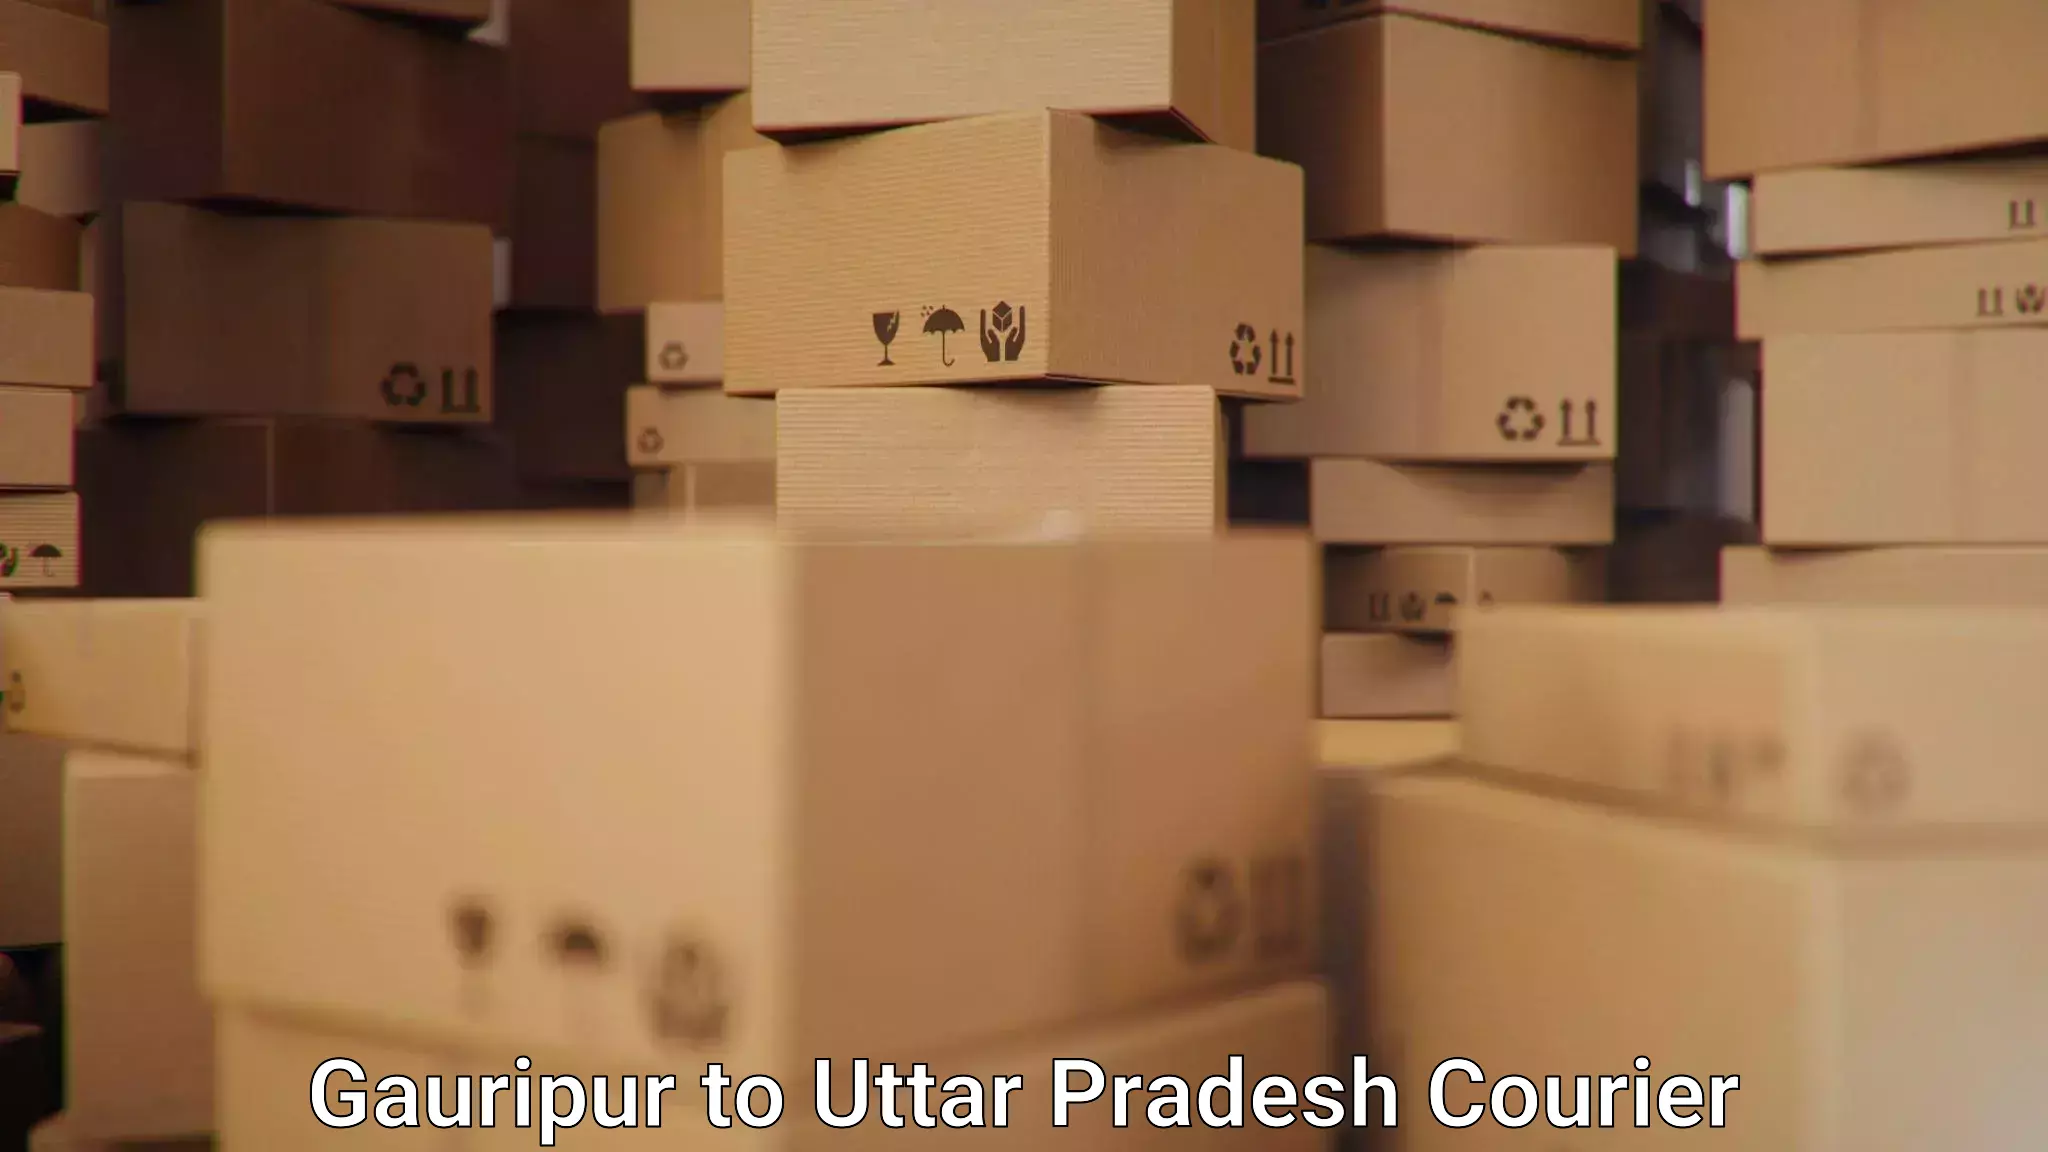 Reliable parcel services in Gauripur to Amethi